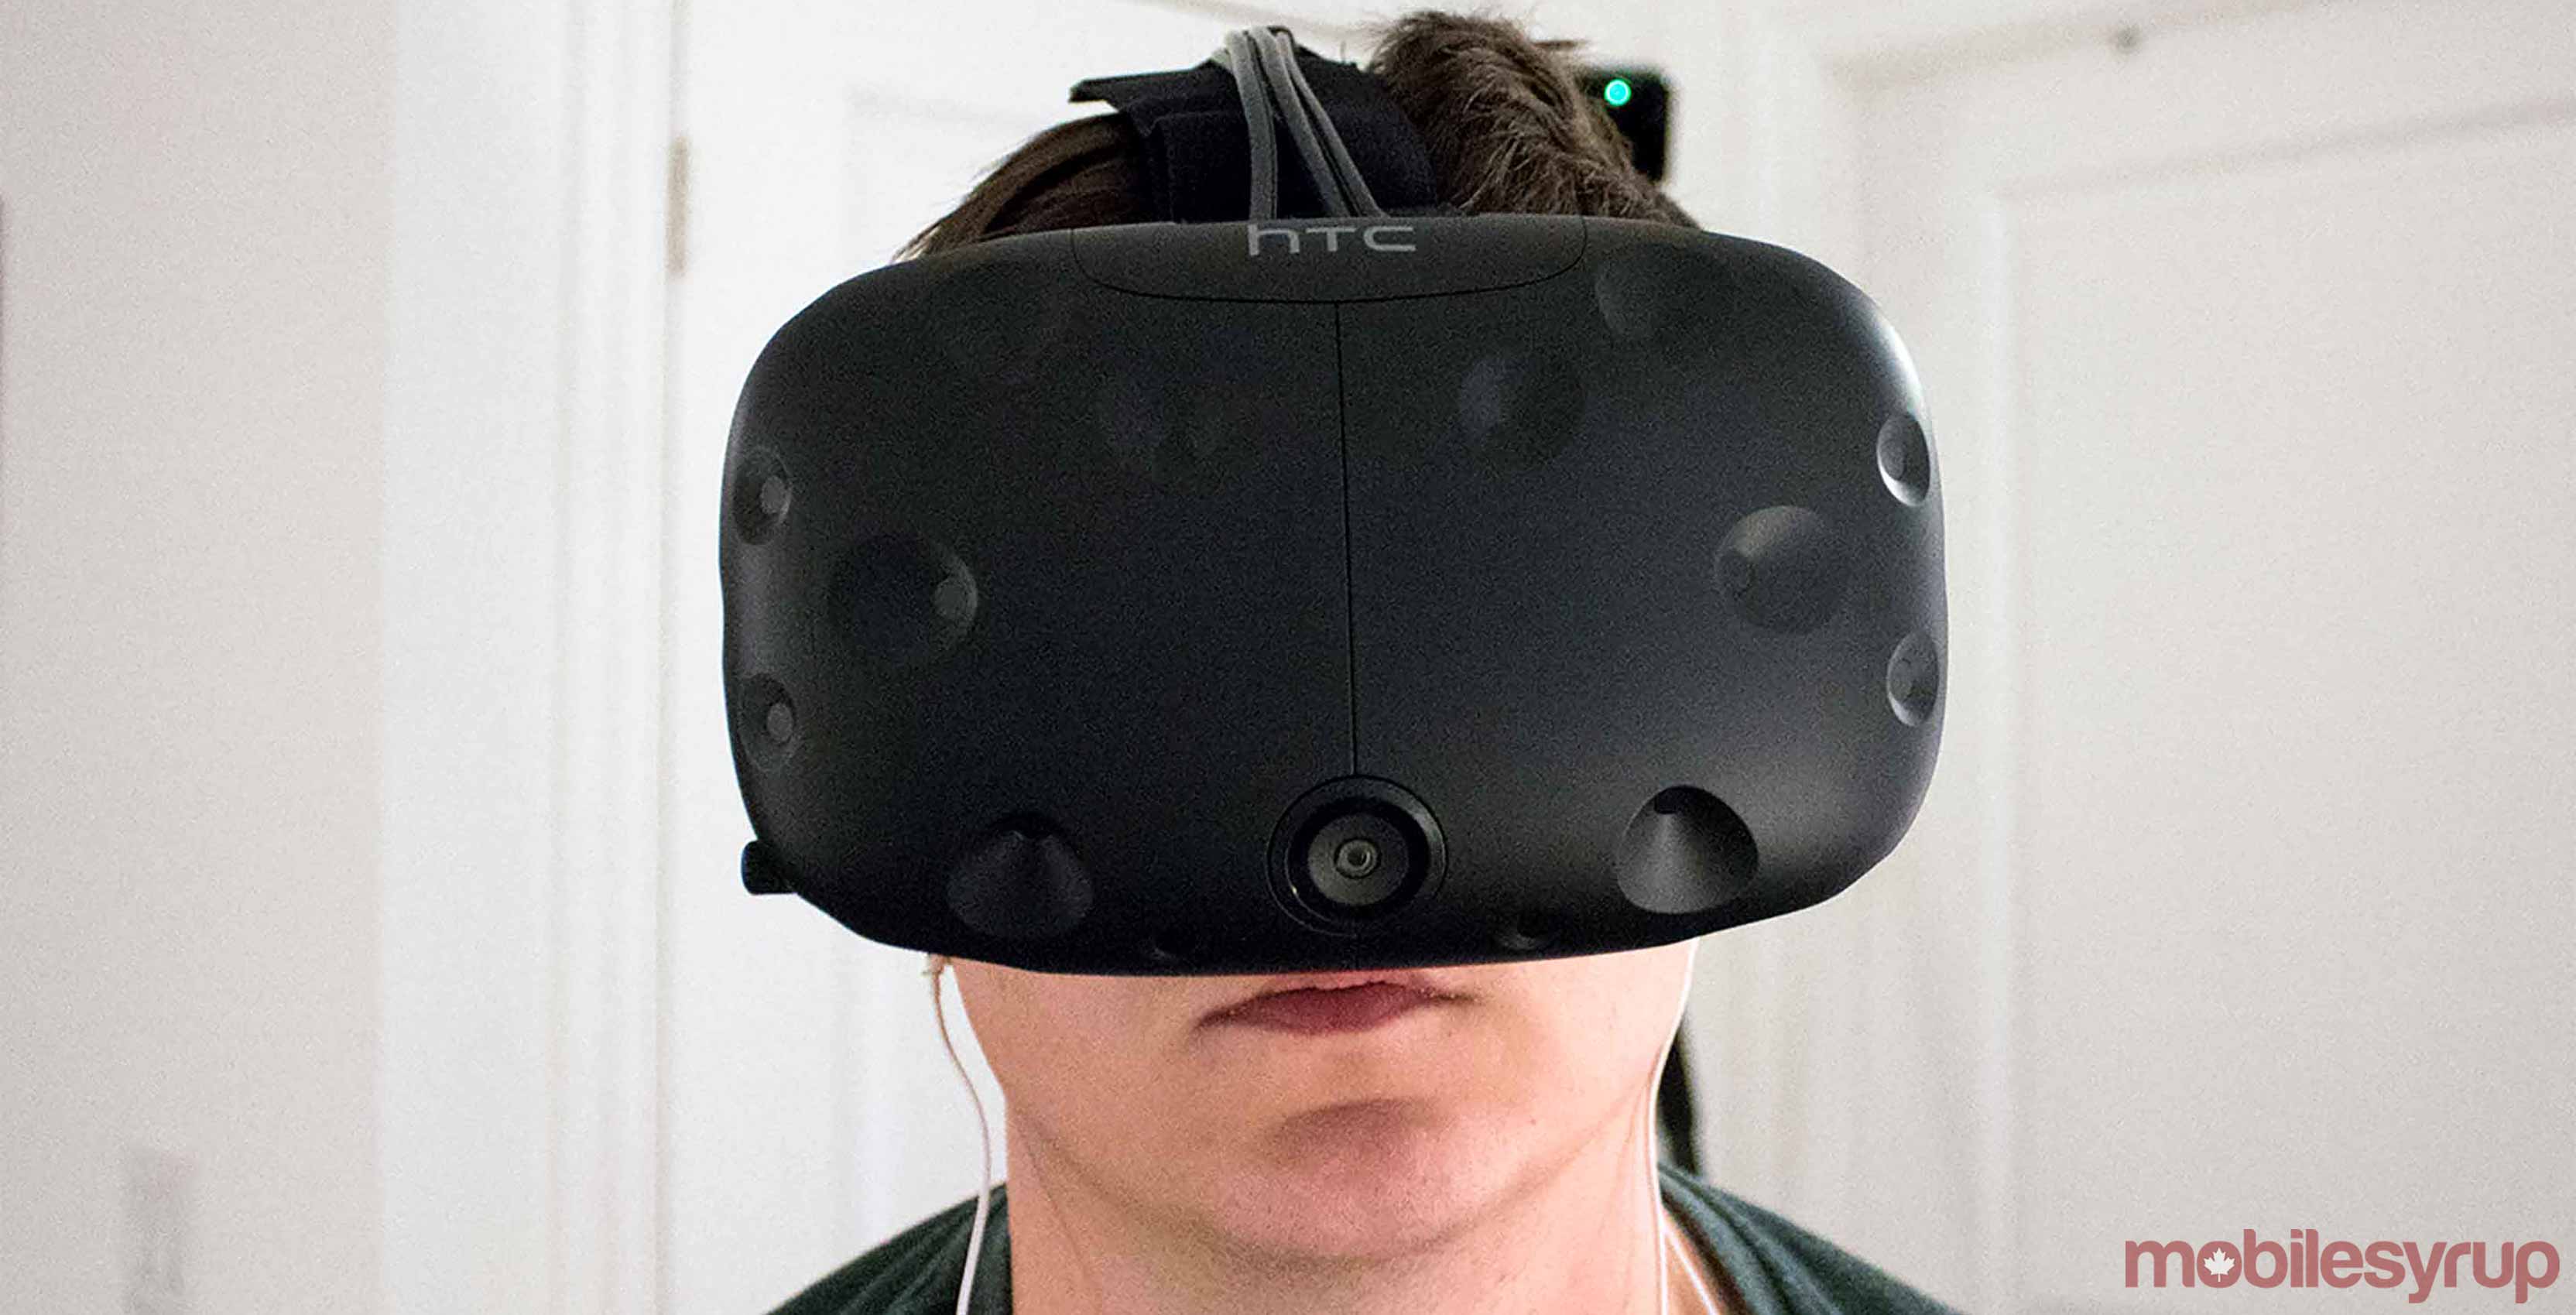 Guy wearing the HTC Vive VR